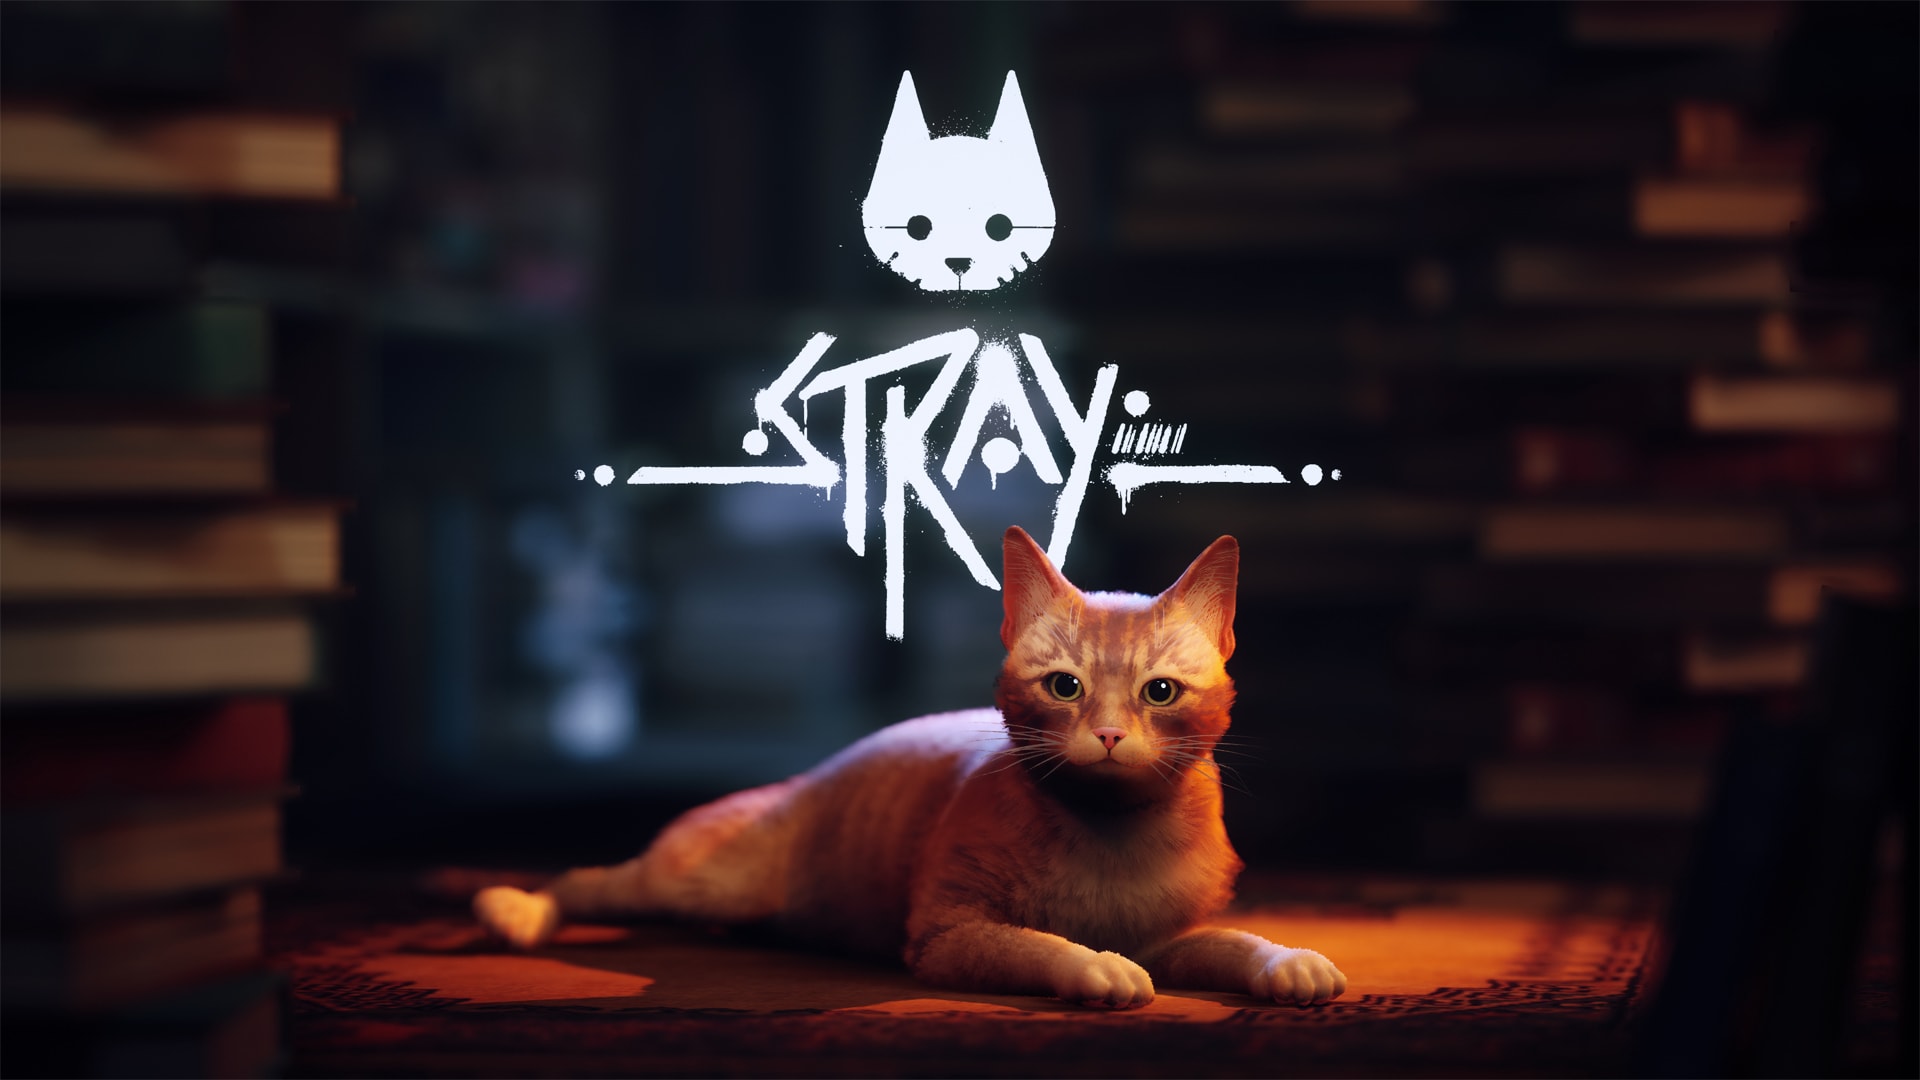 A purr-ler of a game: A Kat and a cat review Stray for PS5